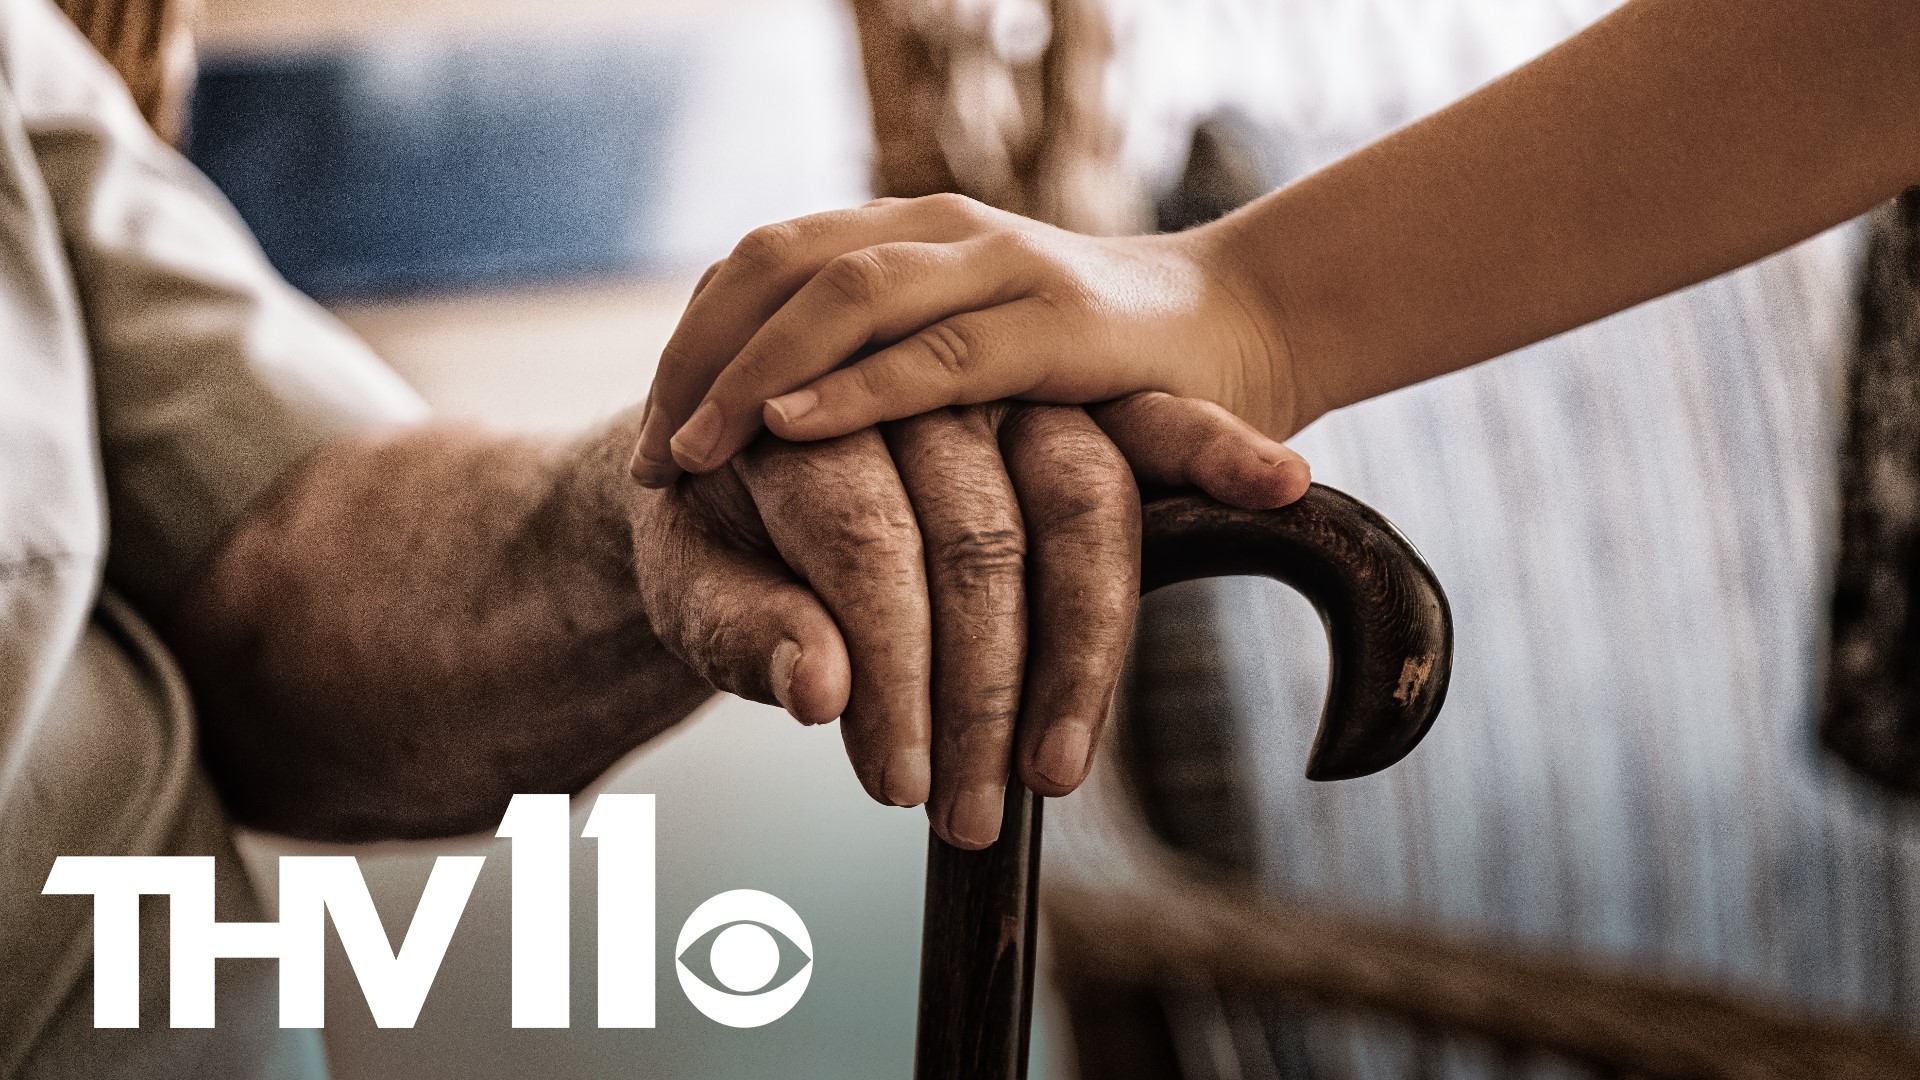 People need help as they age. We look closer at the “personal needs allowance” and how it affects those living in Arkansas nursing homes.